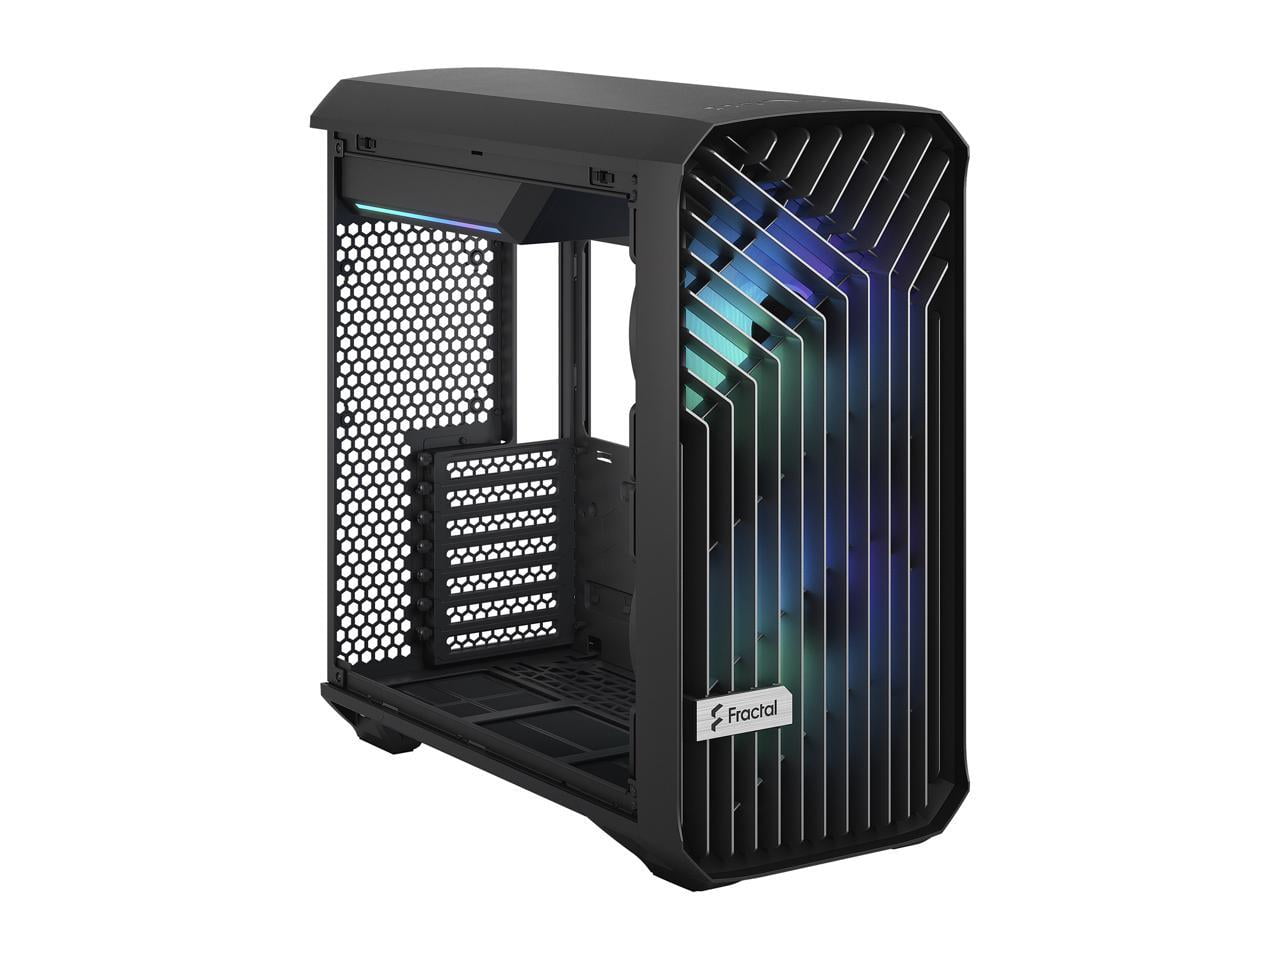  Fractal Design Torrent Compact RGB Black - Light Tint Tempered  Glass Side Panels - Open Grille for Maximum air Intake - Two 180mm RGB PWM  Fans Included - Type C 